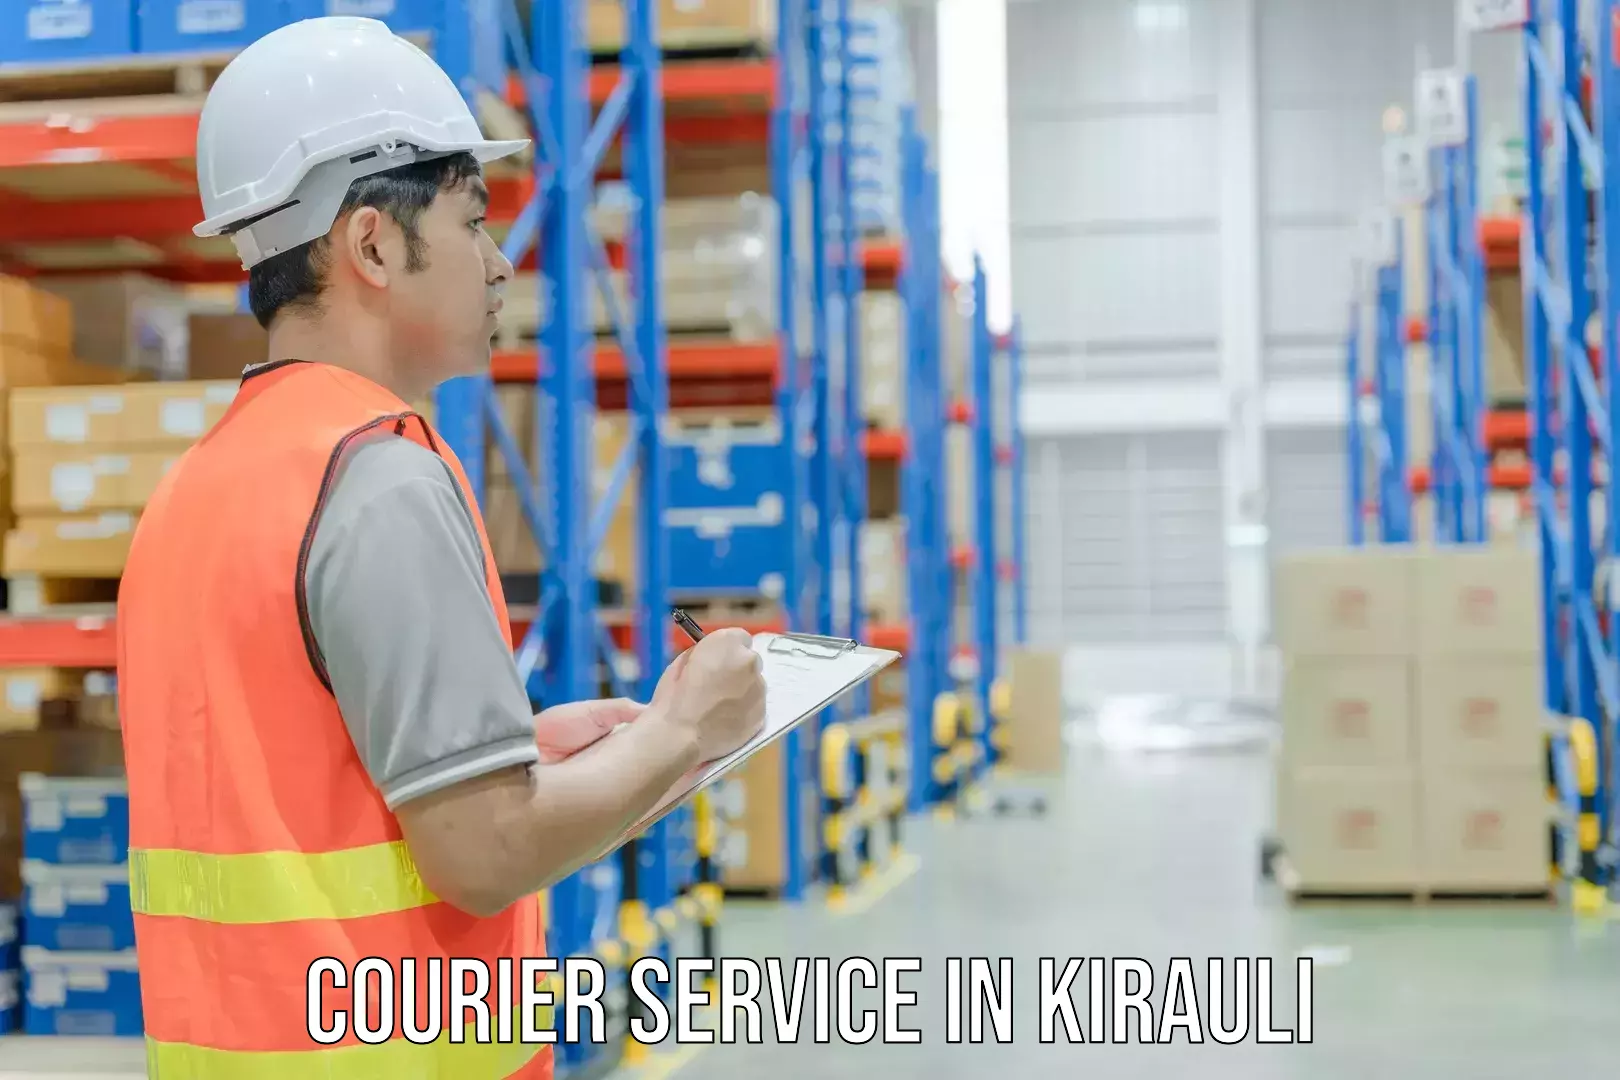 Express delivery capabilities in Kirauli